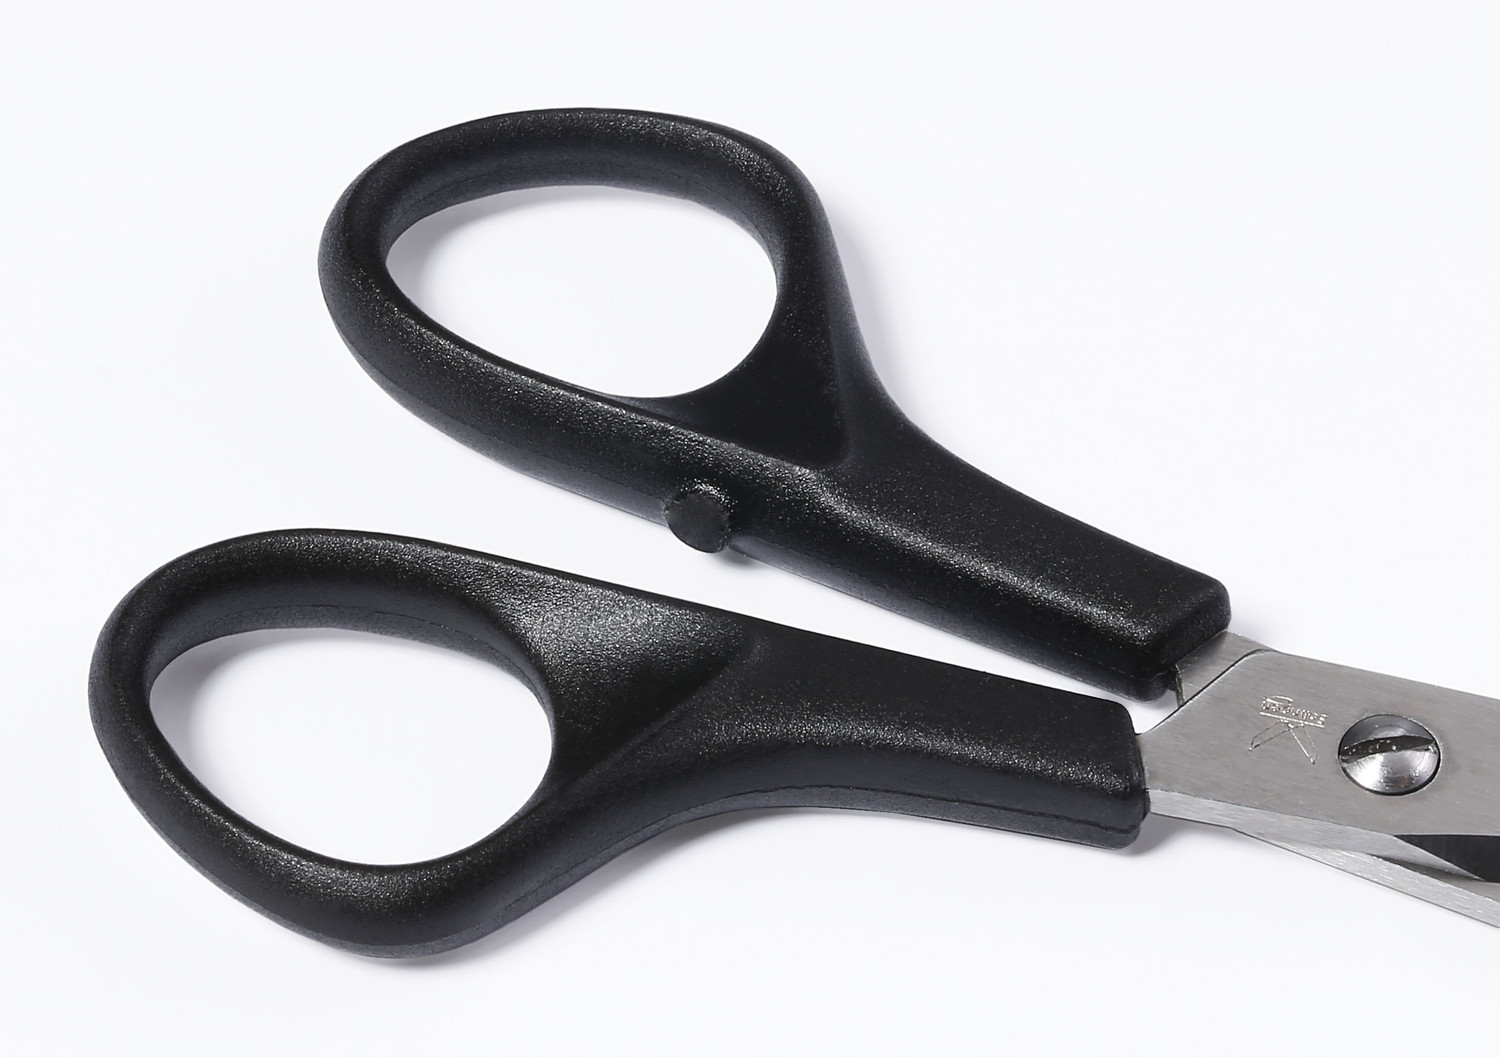 Robust scissor handles made of high-impact proof ABS plastic.